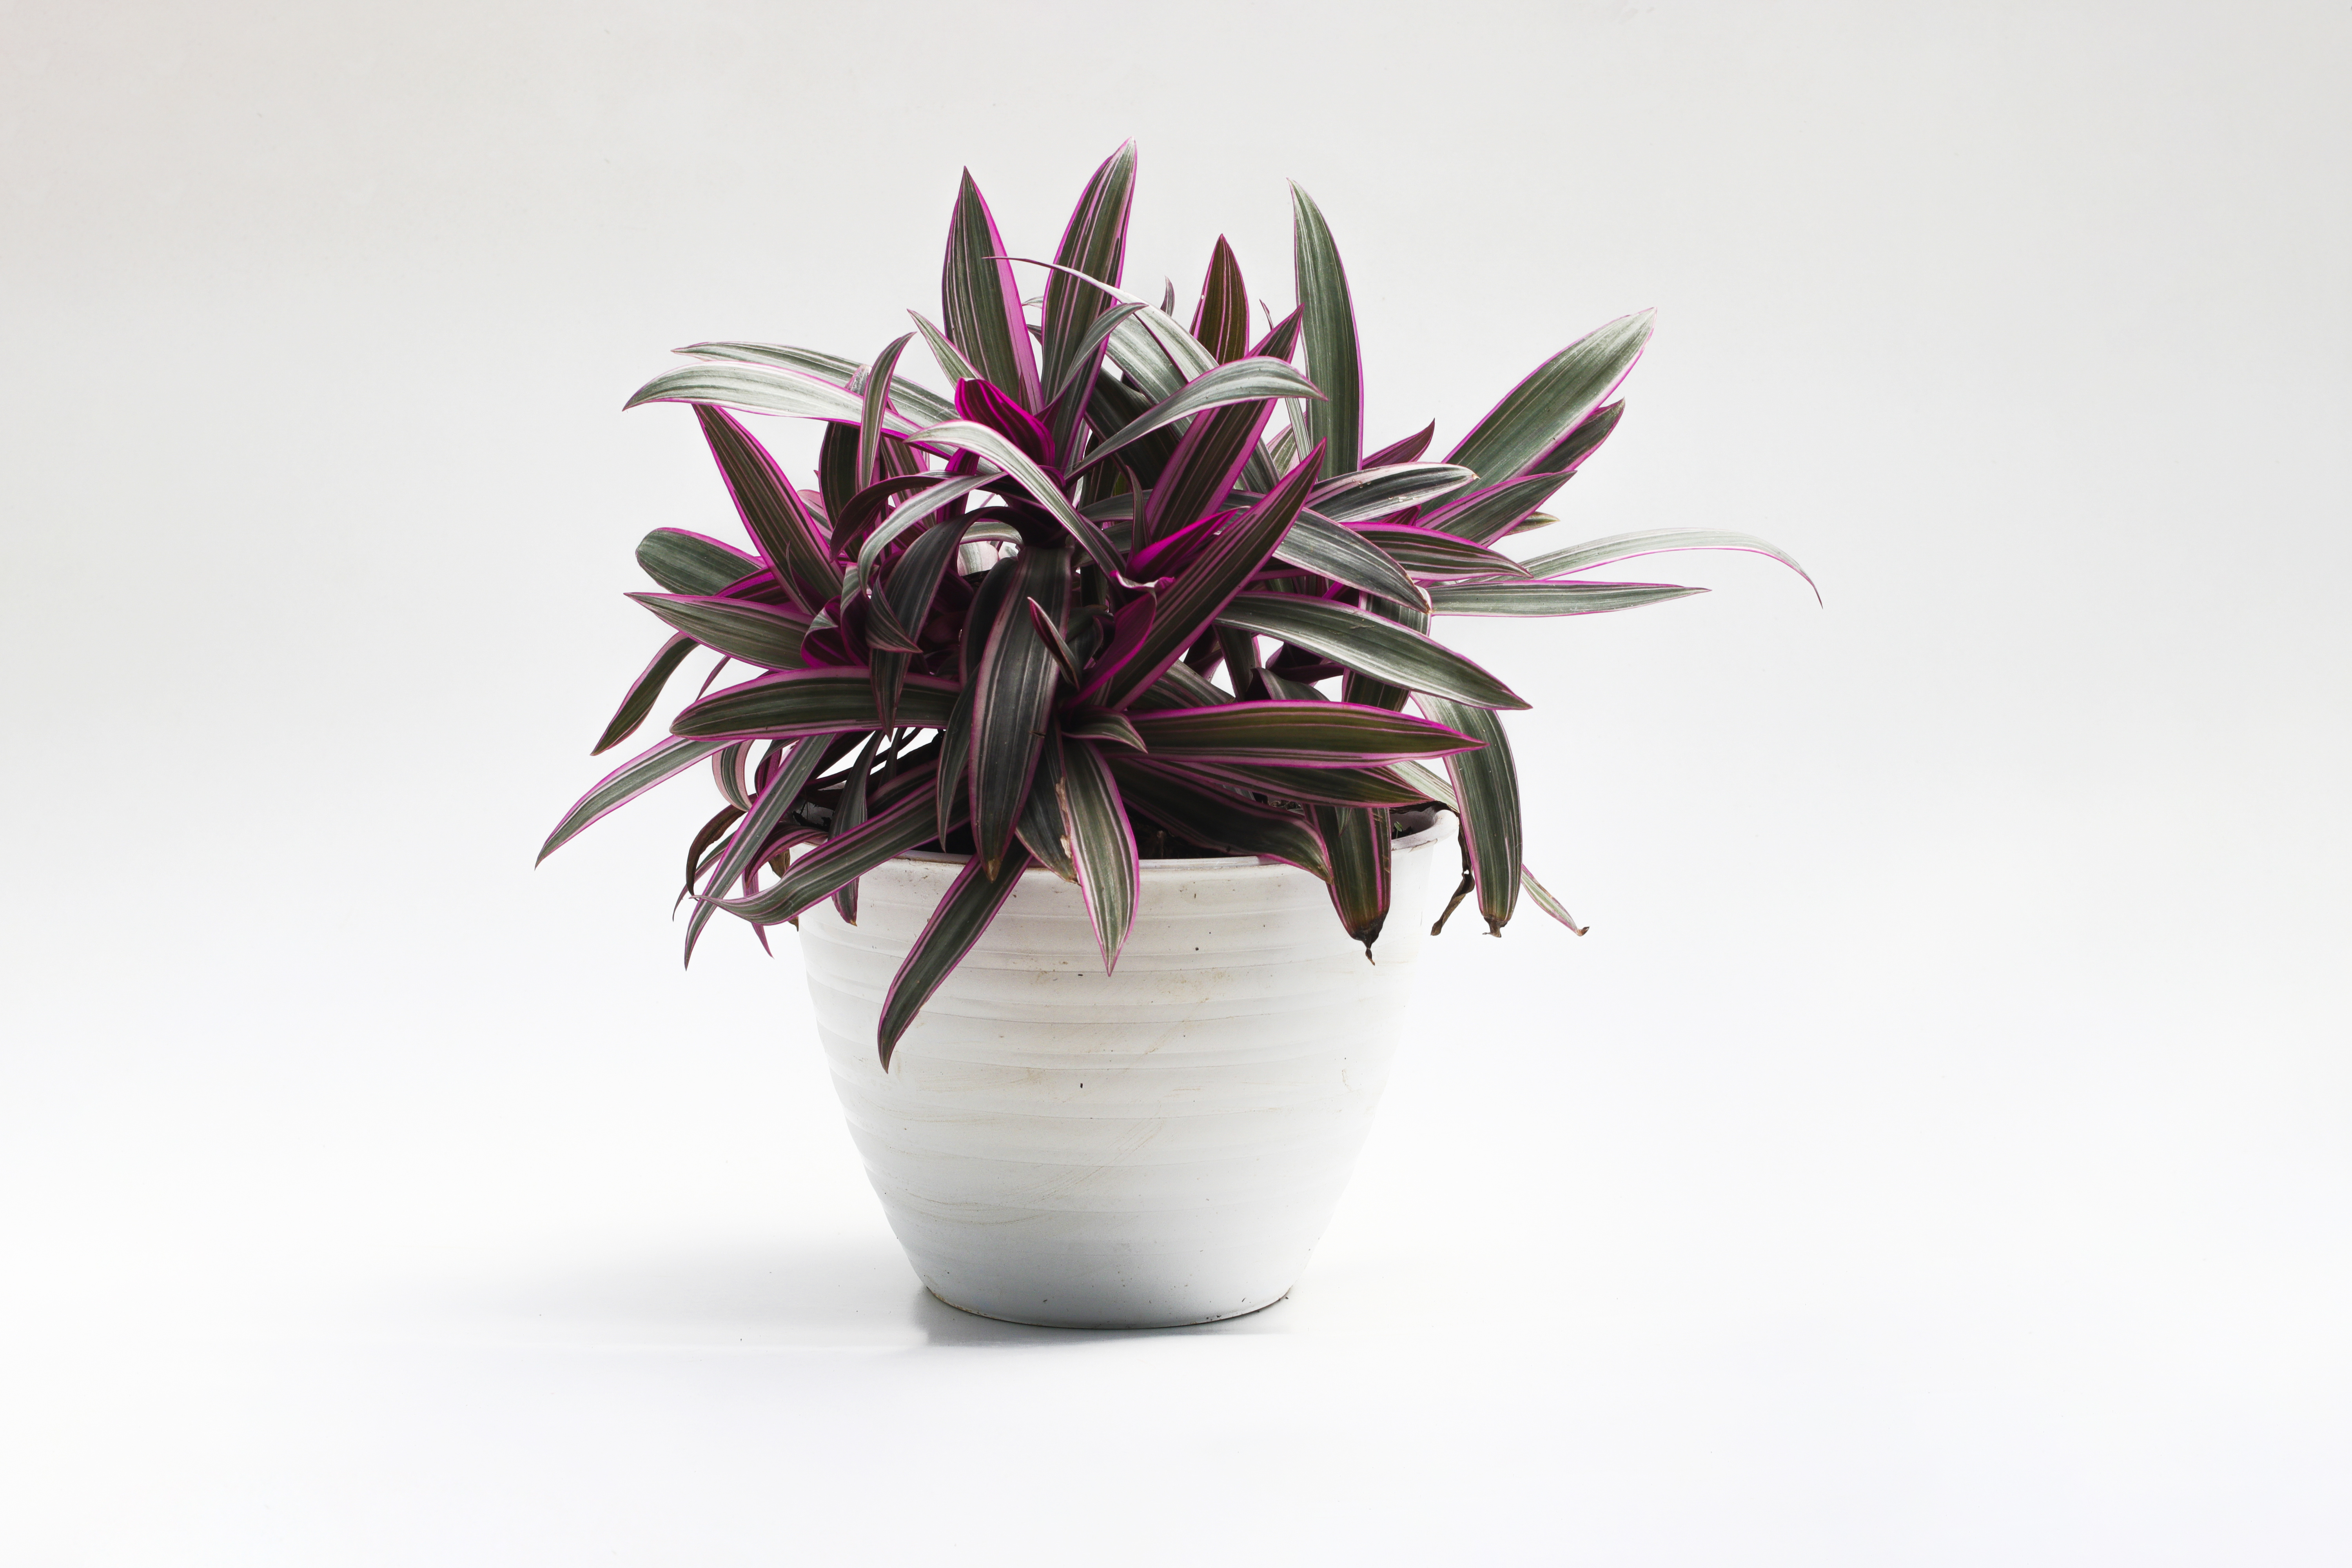 The Best Way to Water Your Tradescantia spathacea